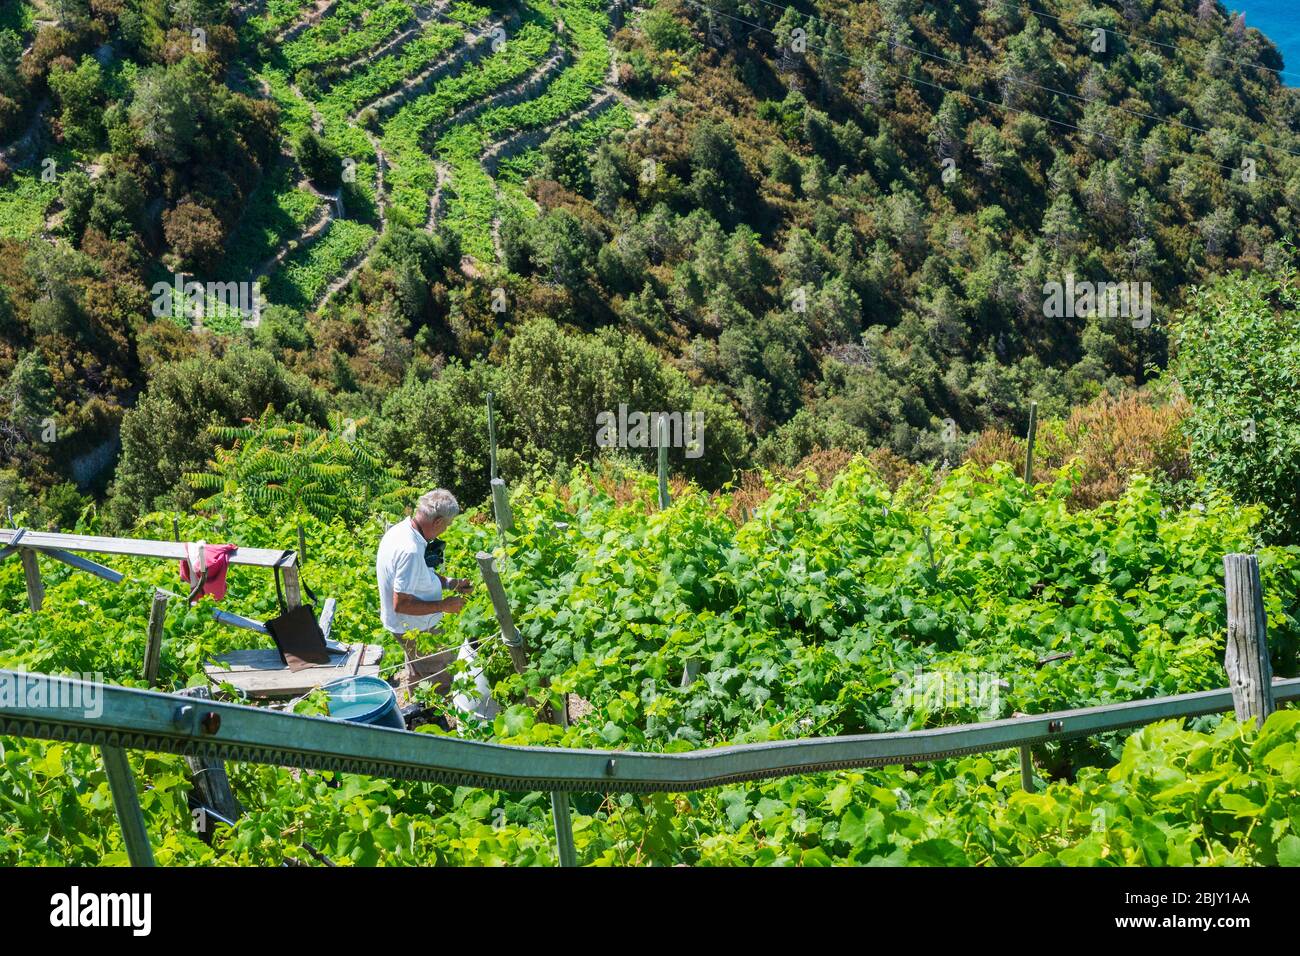 Adult senior man working in his terraced vineyard alongside his monorail system used to transport grapes to his farm in the steeply sloped vineyards i Stock Photo